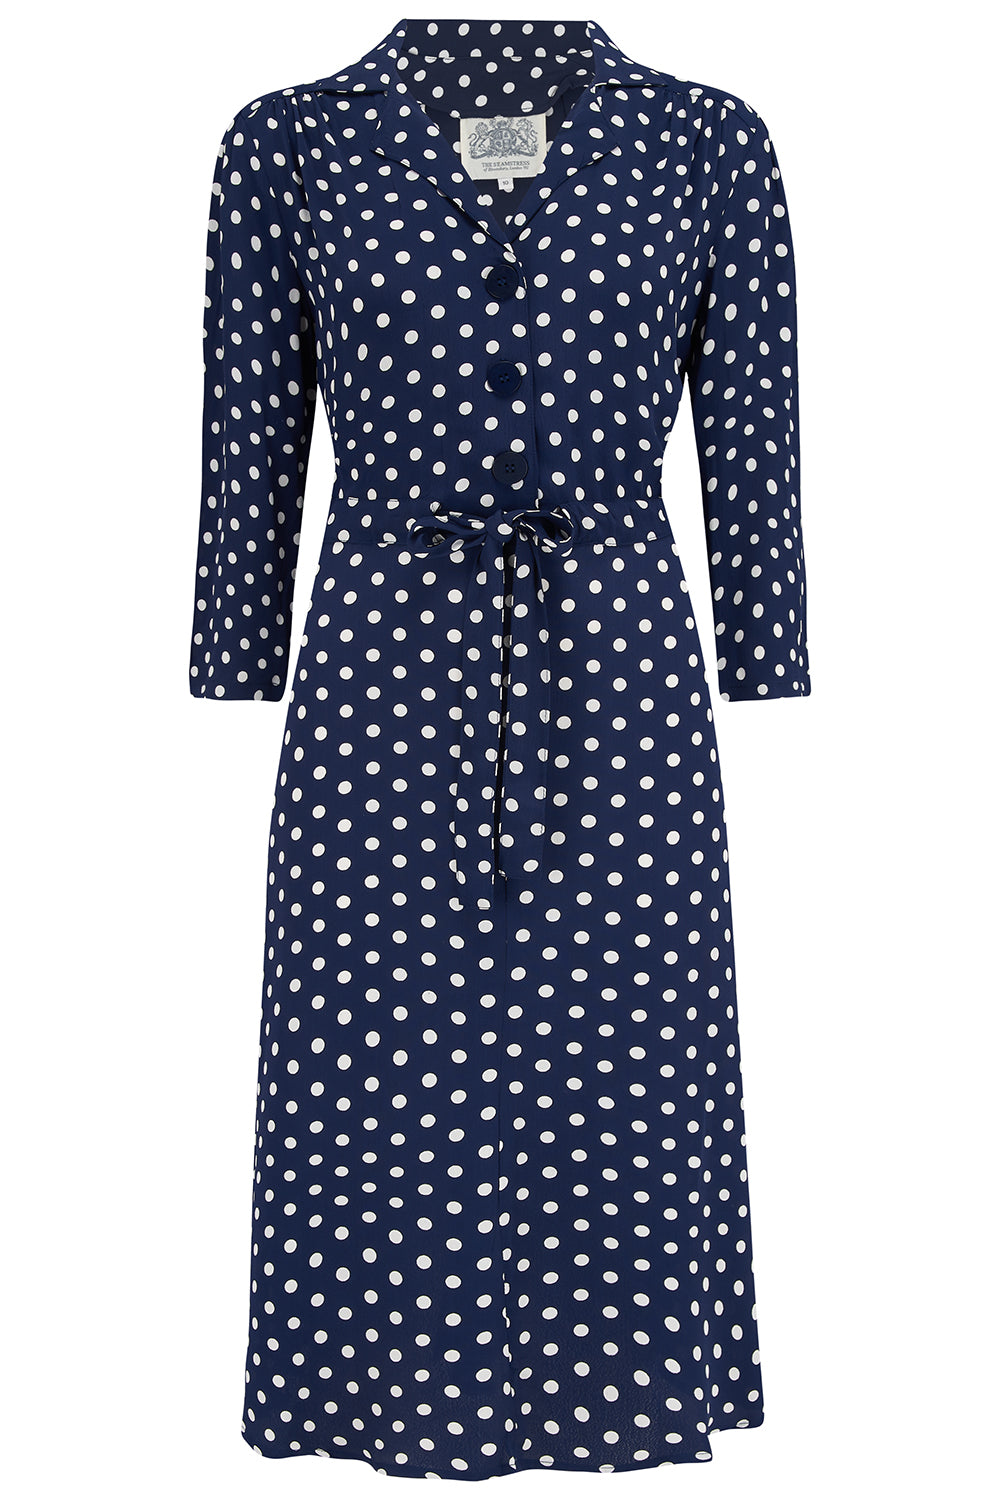 Milly dress in Navy Polka , A Classic 1940s Inspired Day dress, True Vintage Style - CC41, Goodwood Revival, Twinwood Festival, Viva Las Vegas Rockabilly Weekend Rock n Romance The Seamstress of Bloomsbury